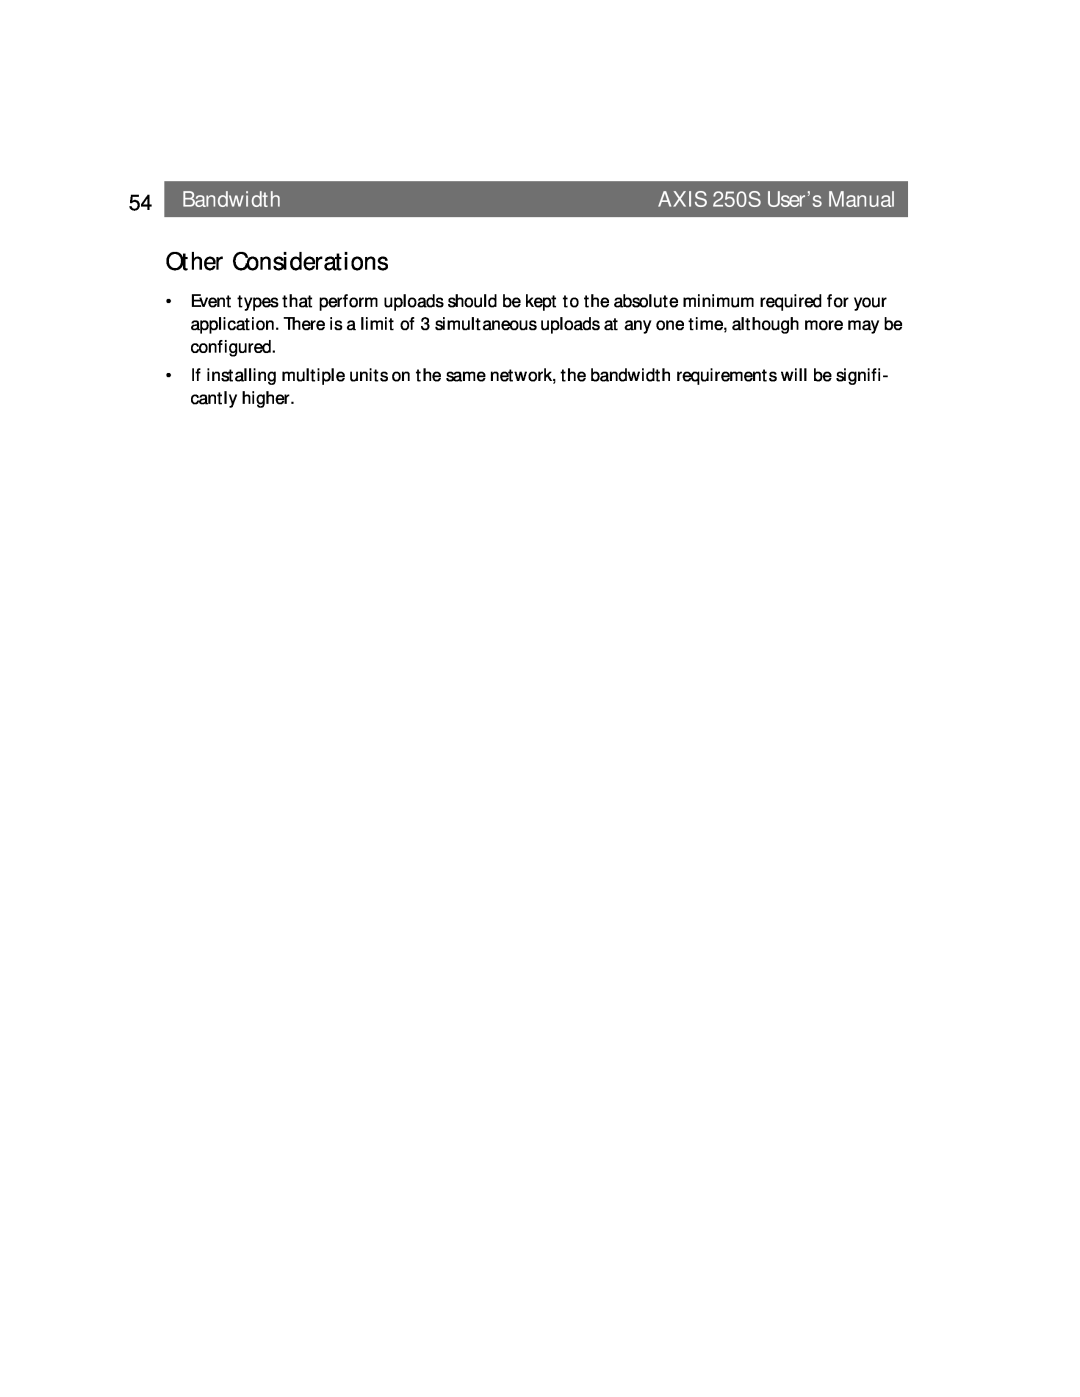 Axis Communications user manual Other Considerations, Bandwidth, AXIS 250S User’s Manual 